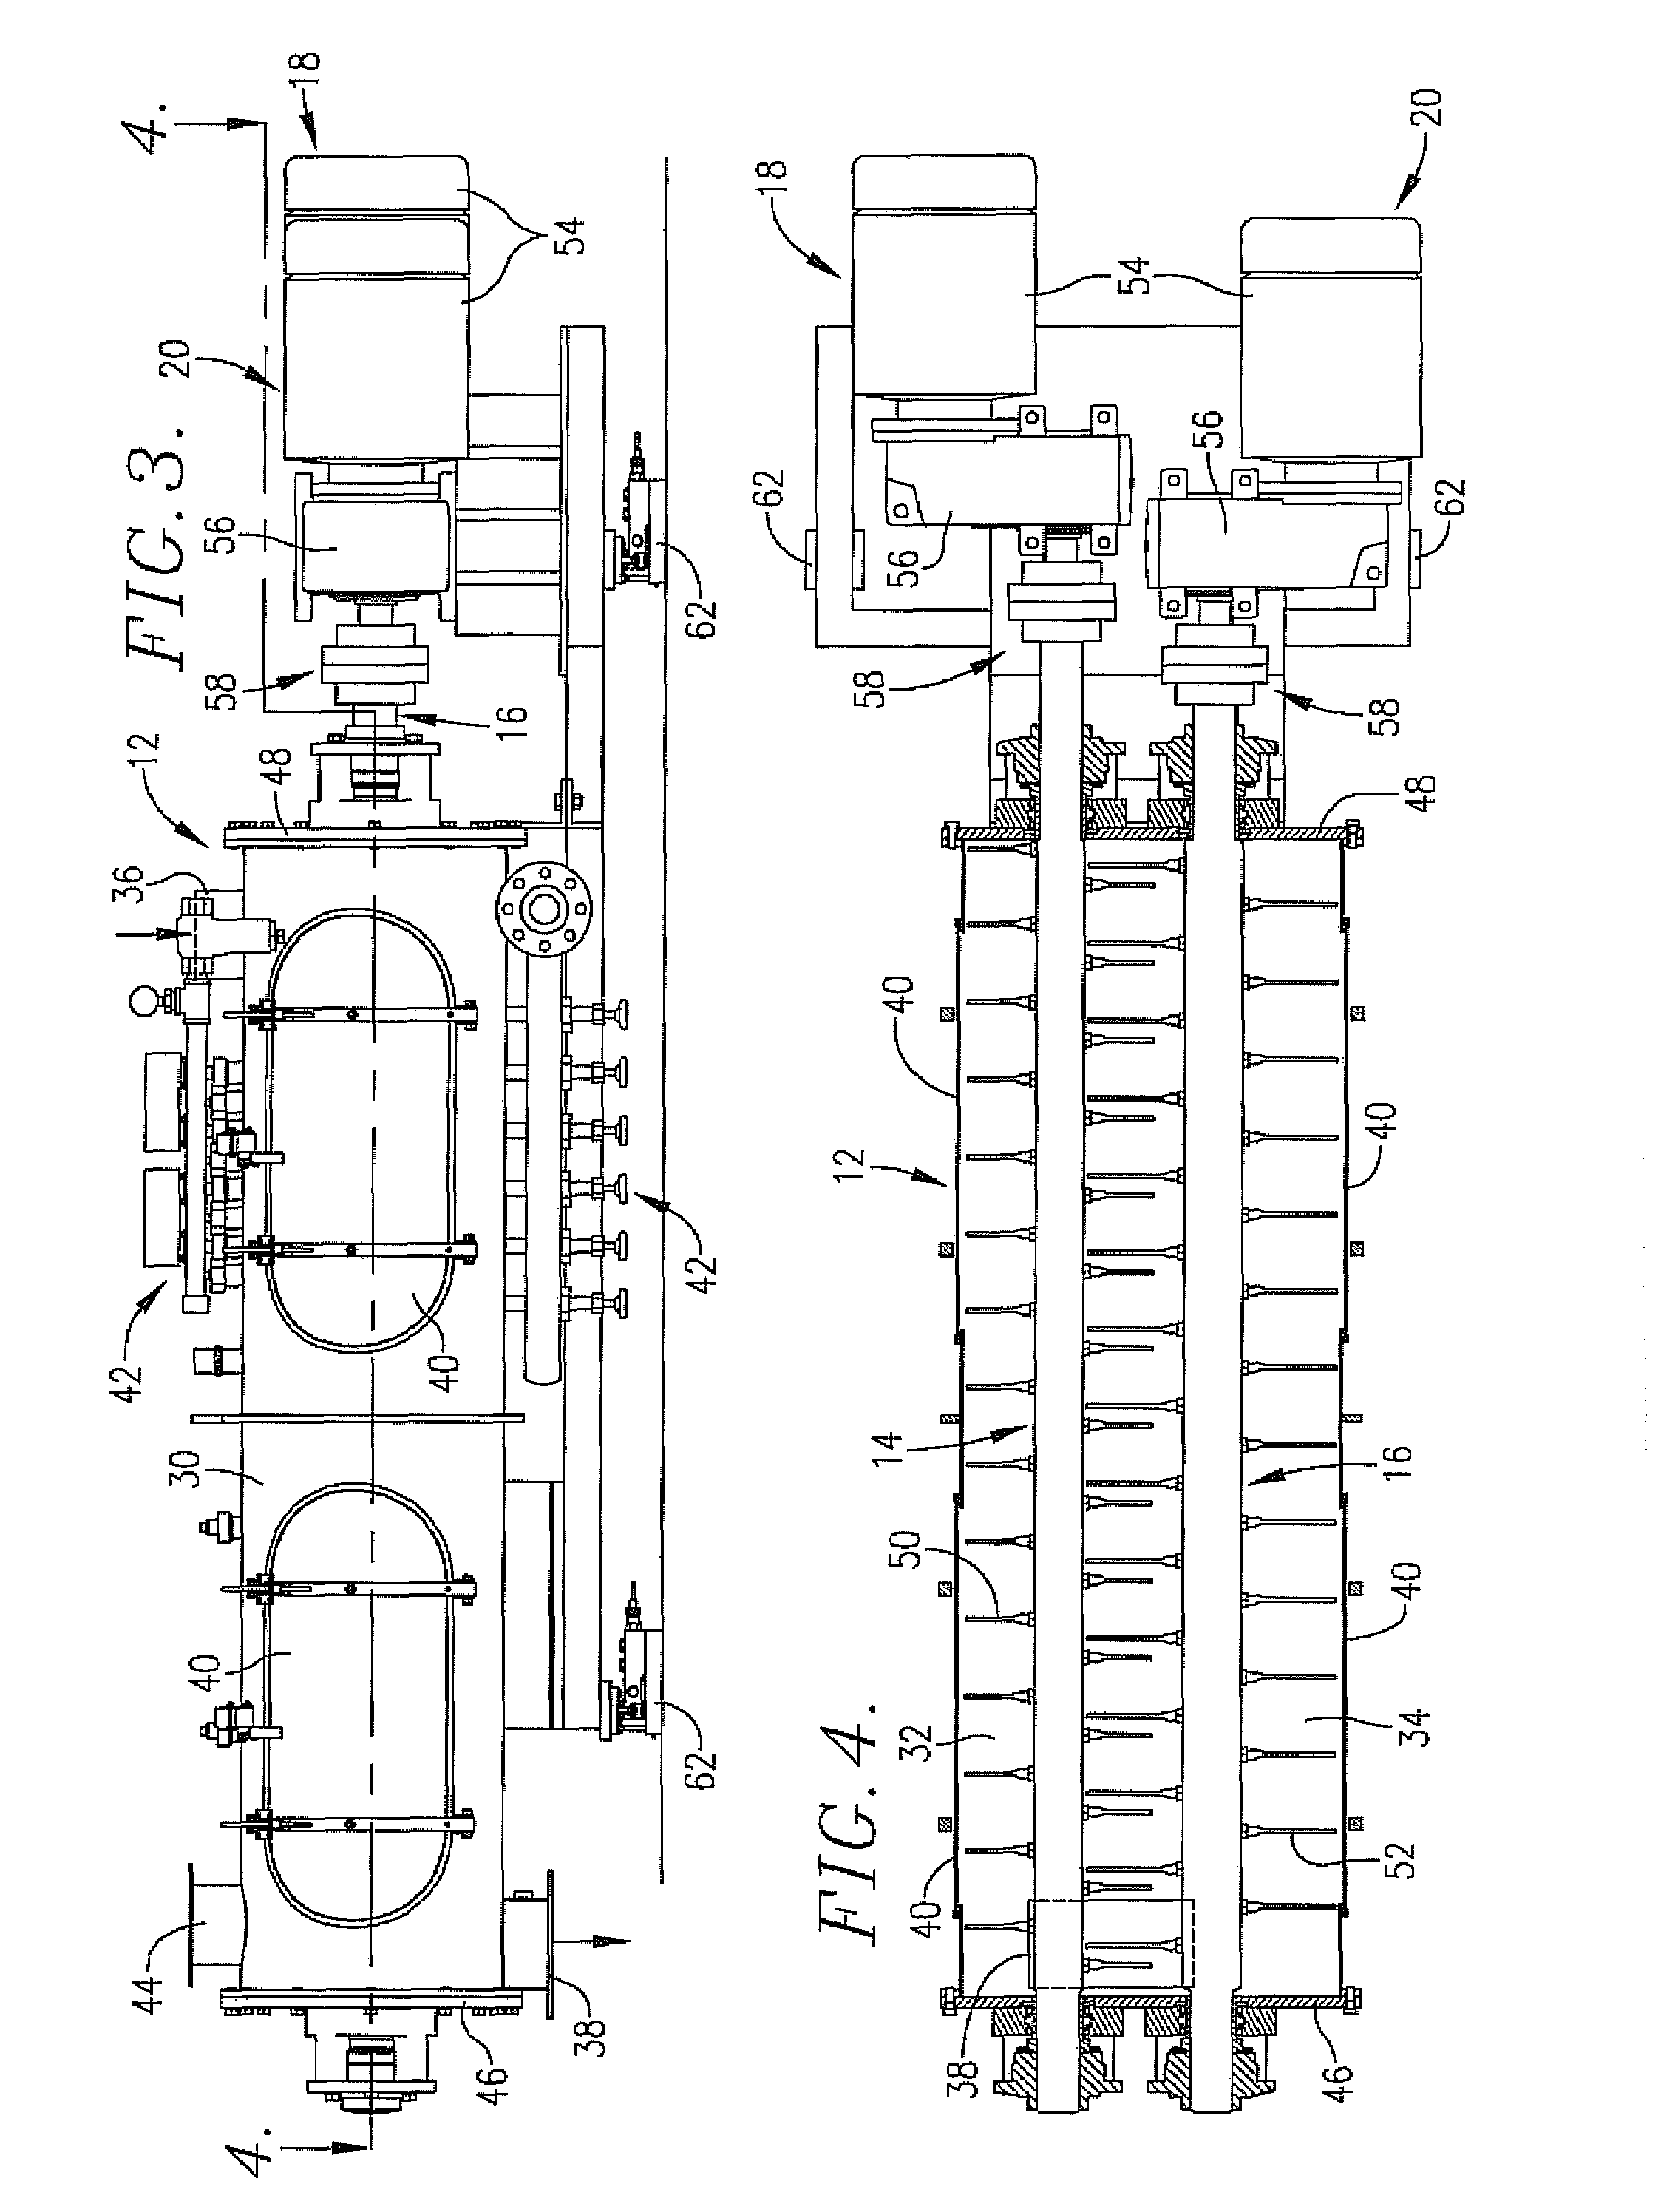 Preconditioner having mixer shafts independently driven with variable frequency drives